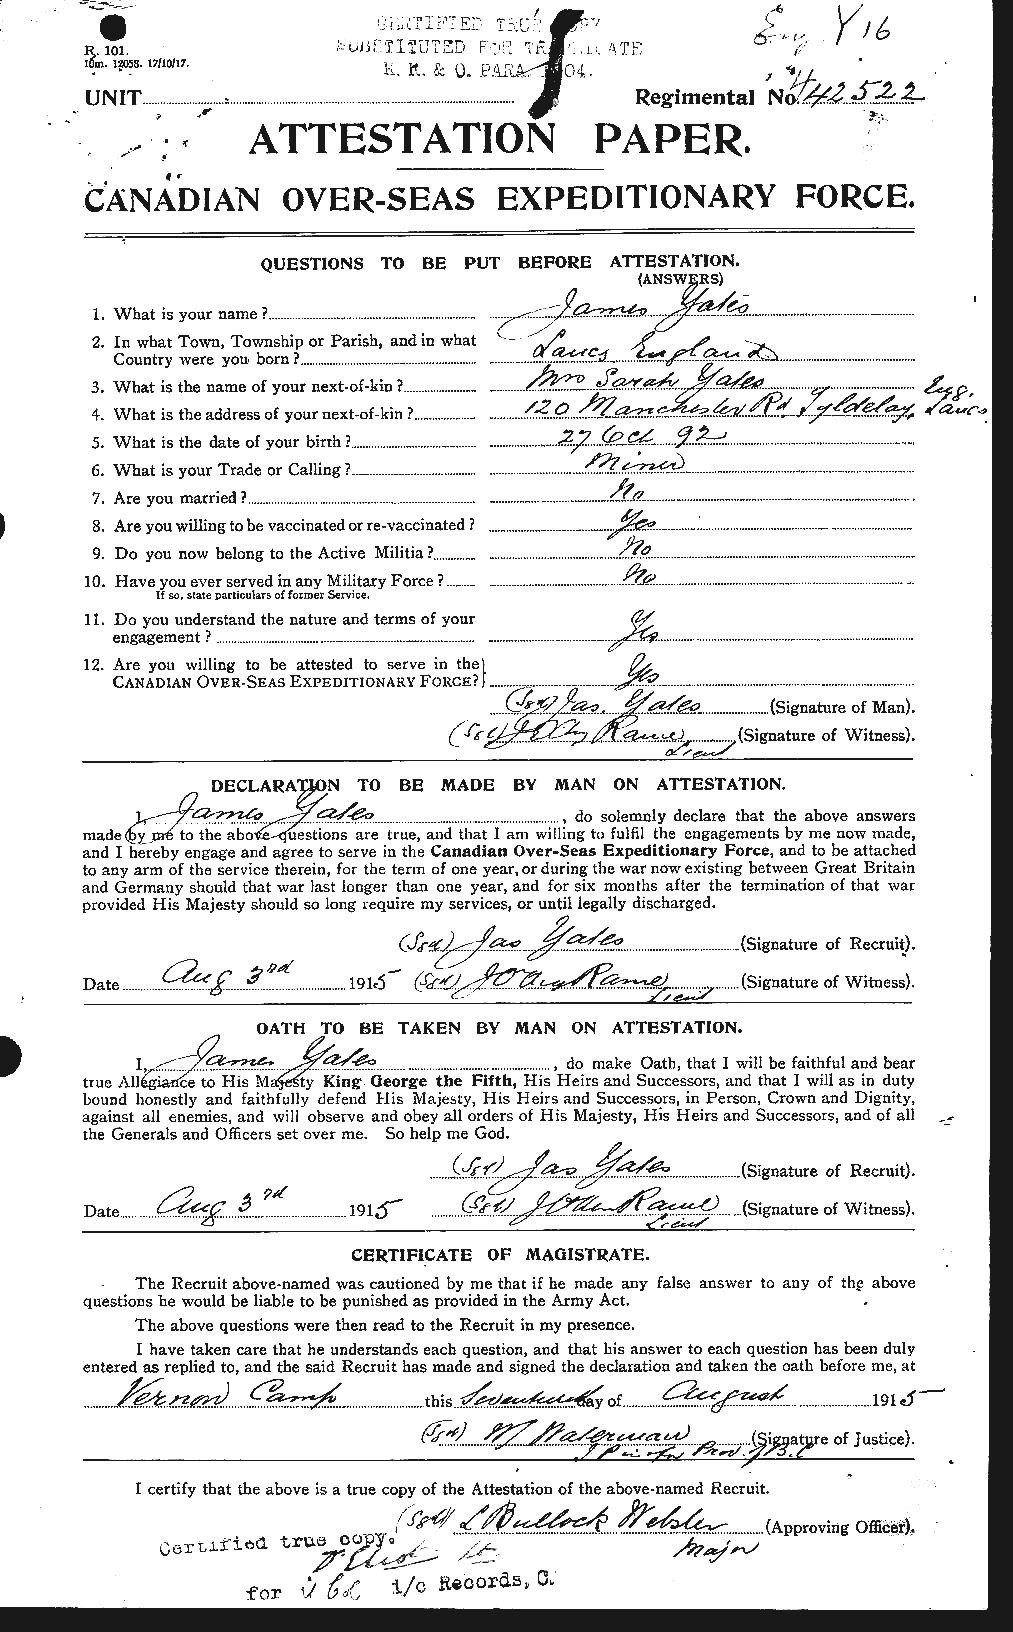 Personnel Records of the First World War - CEF 691263a